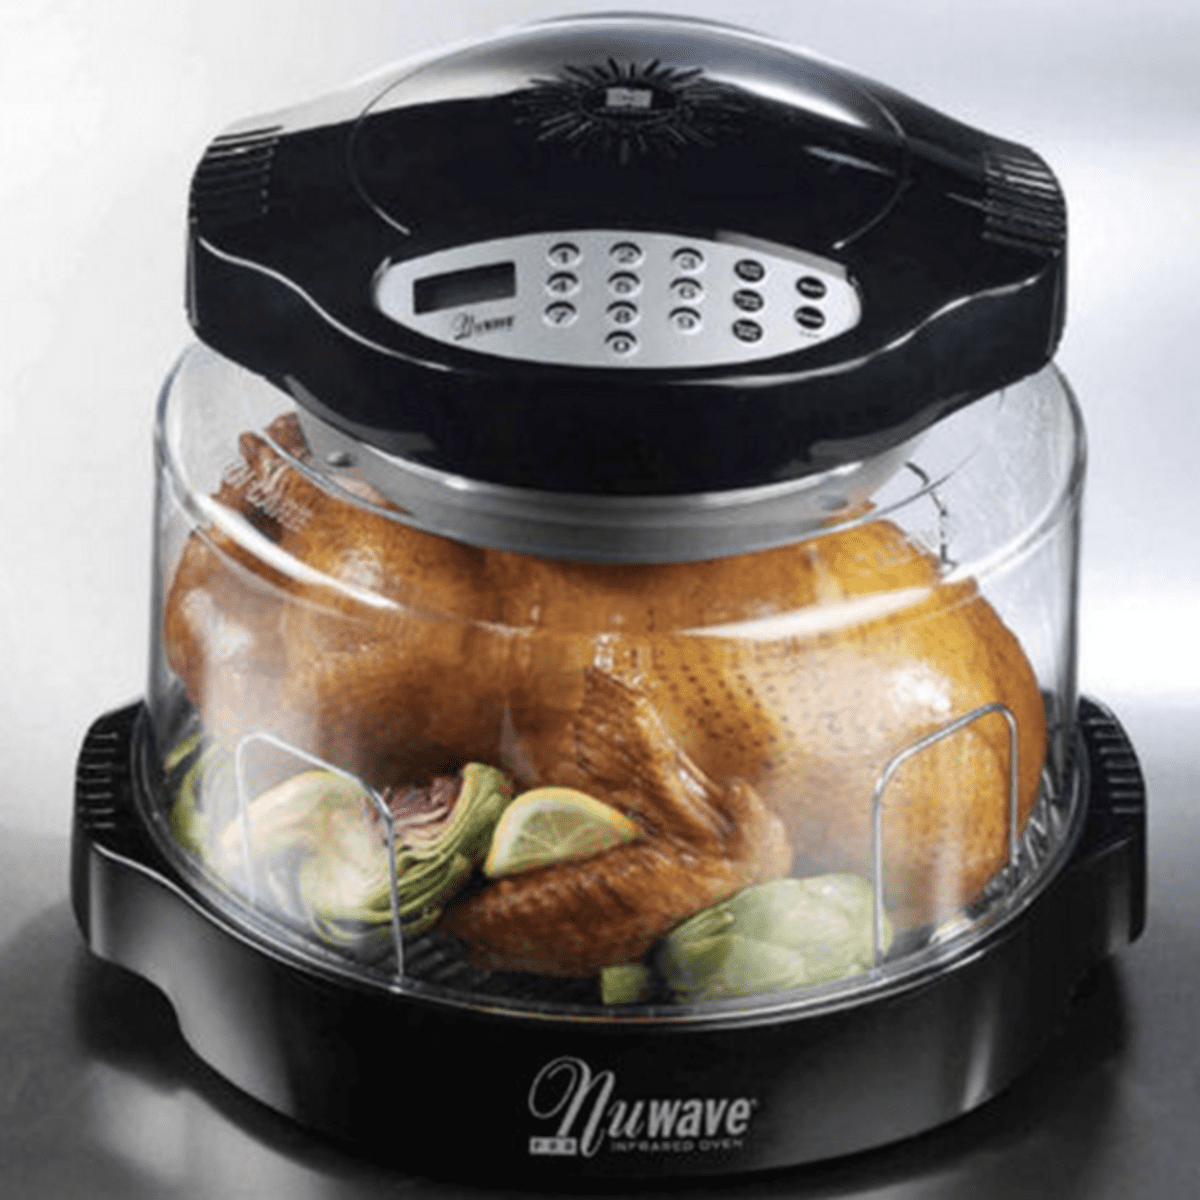 Power AirFryer Oven Review - Deyhydrator Recipes - clean cuisine